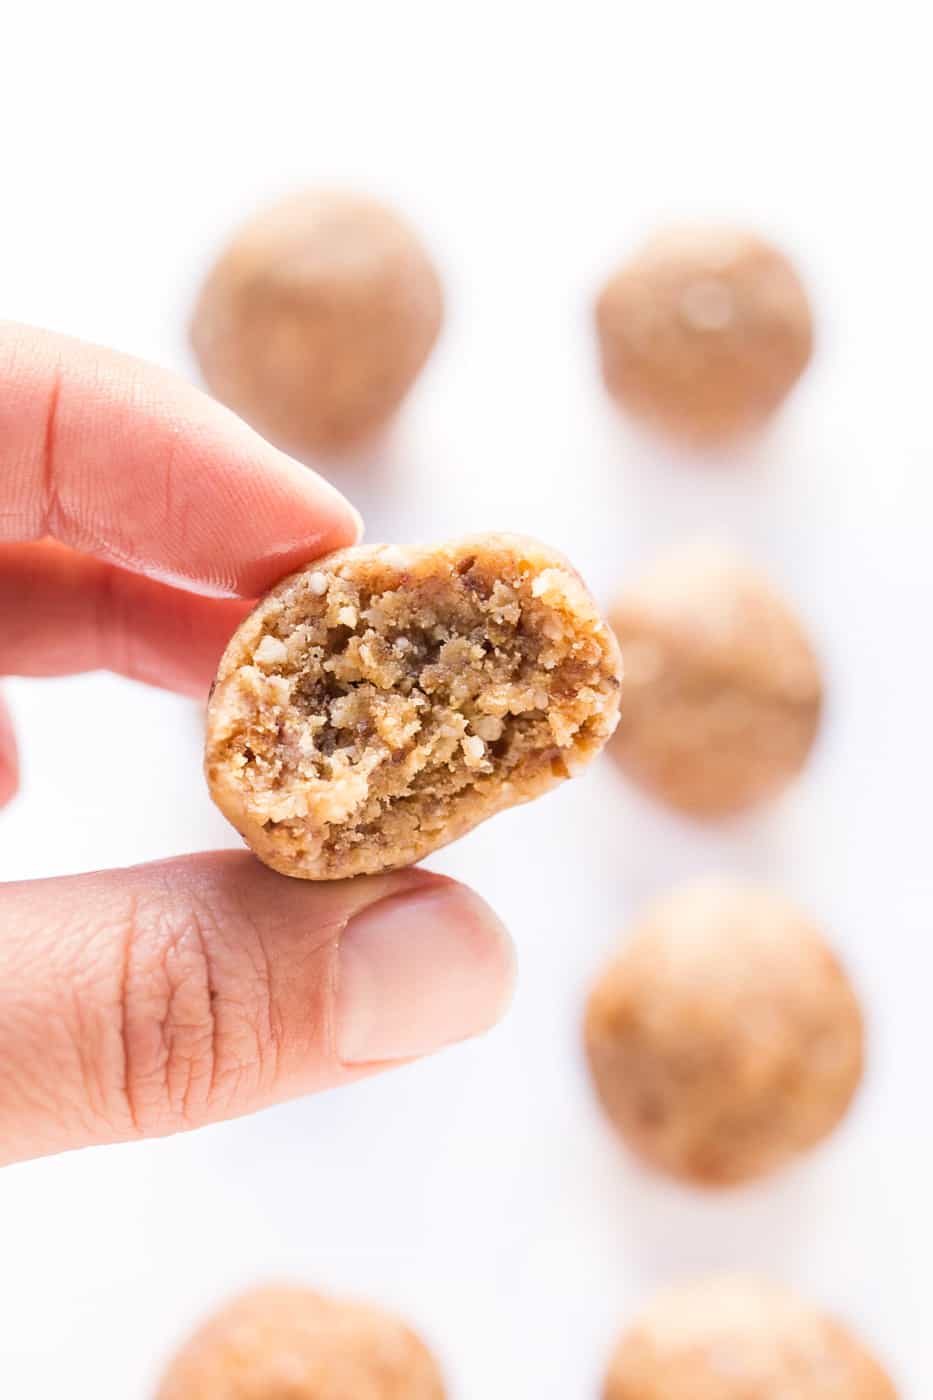 These NO BAKE Lemon Protein Balls are the perfect healthy snack to take on the go. Packed with protein, healthy fats and carbs to fuel you all day long!